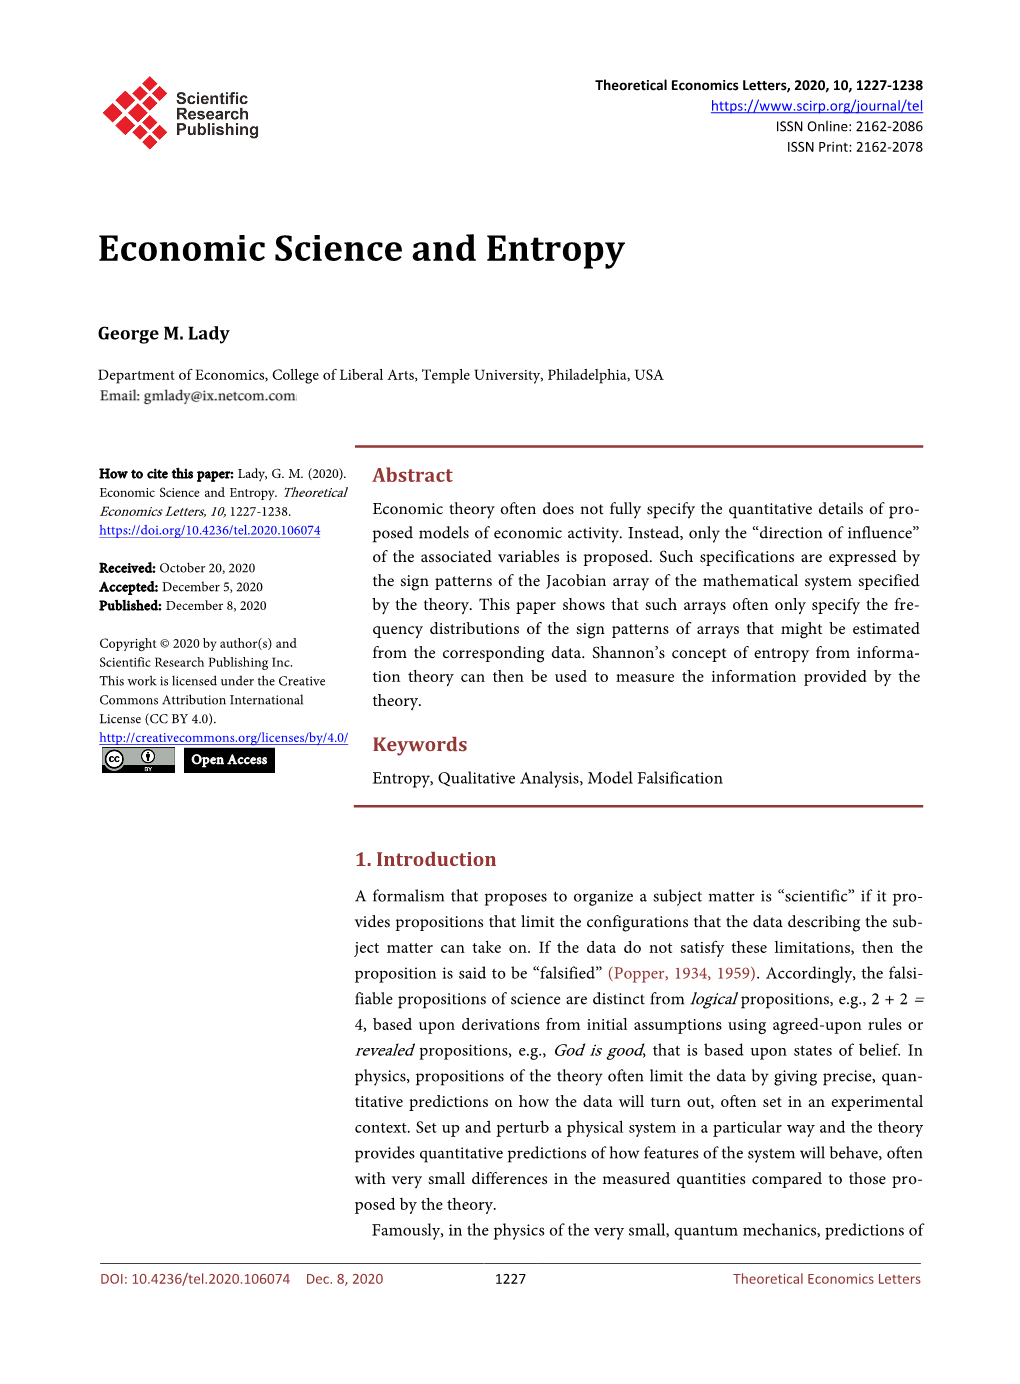 Economic Science and Entropy